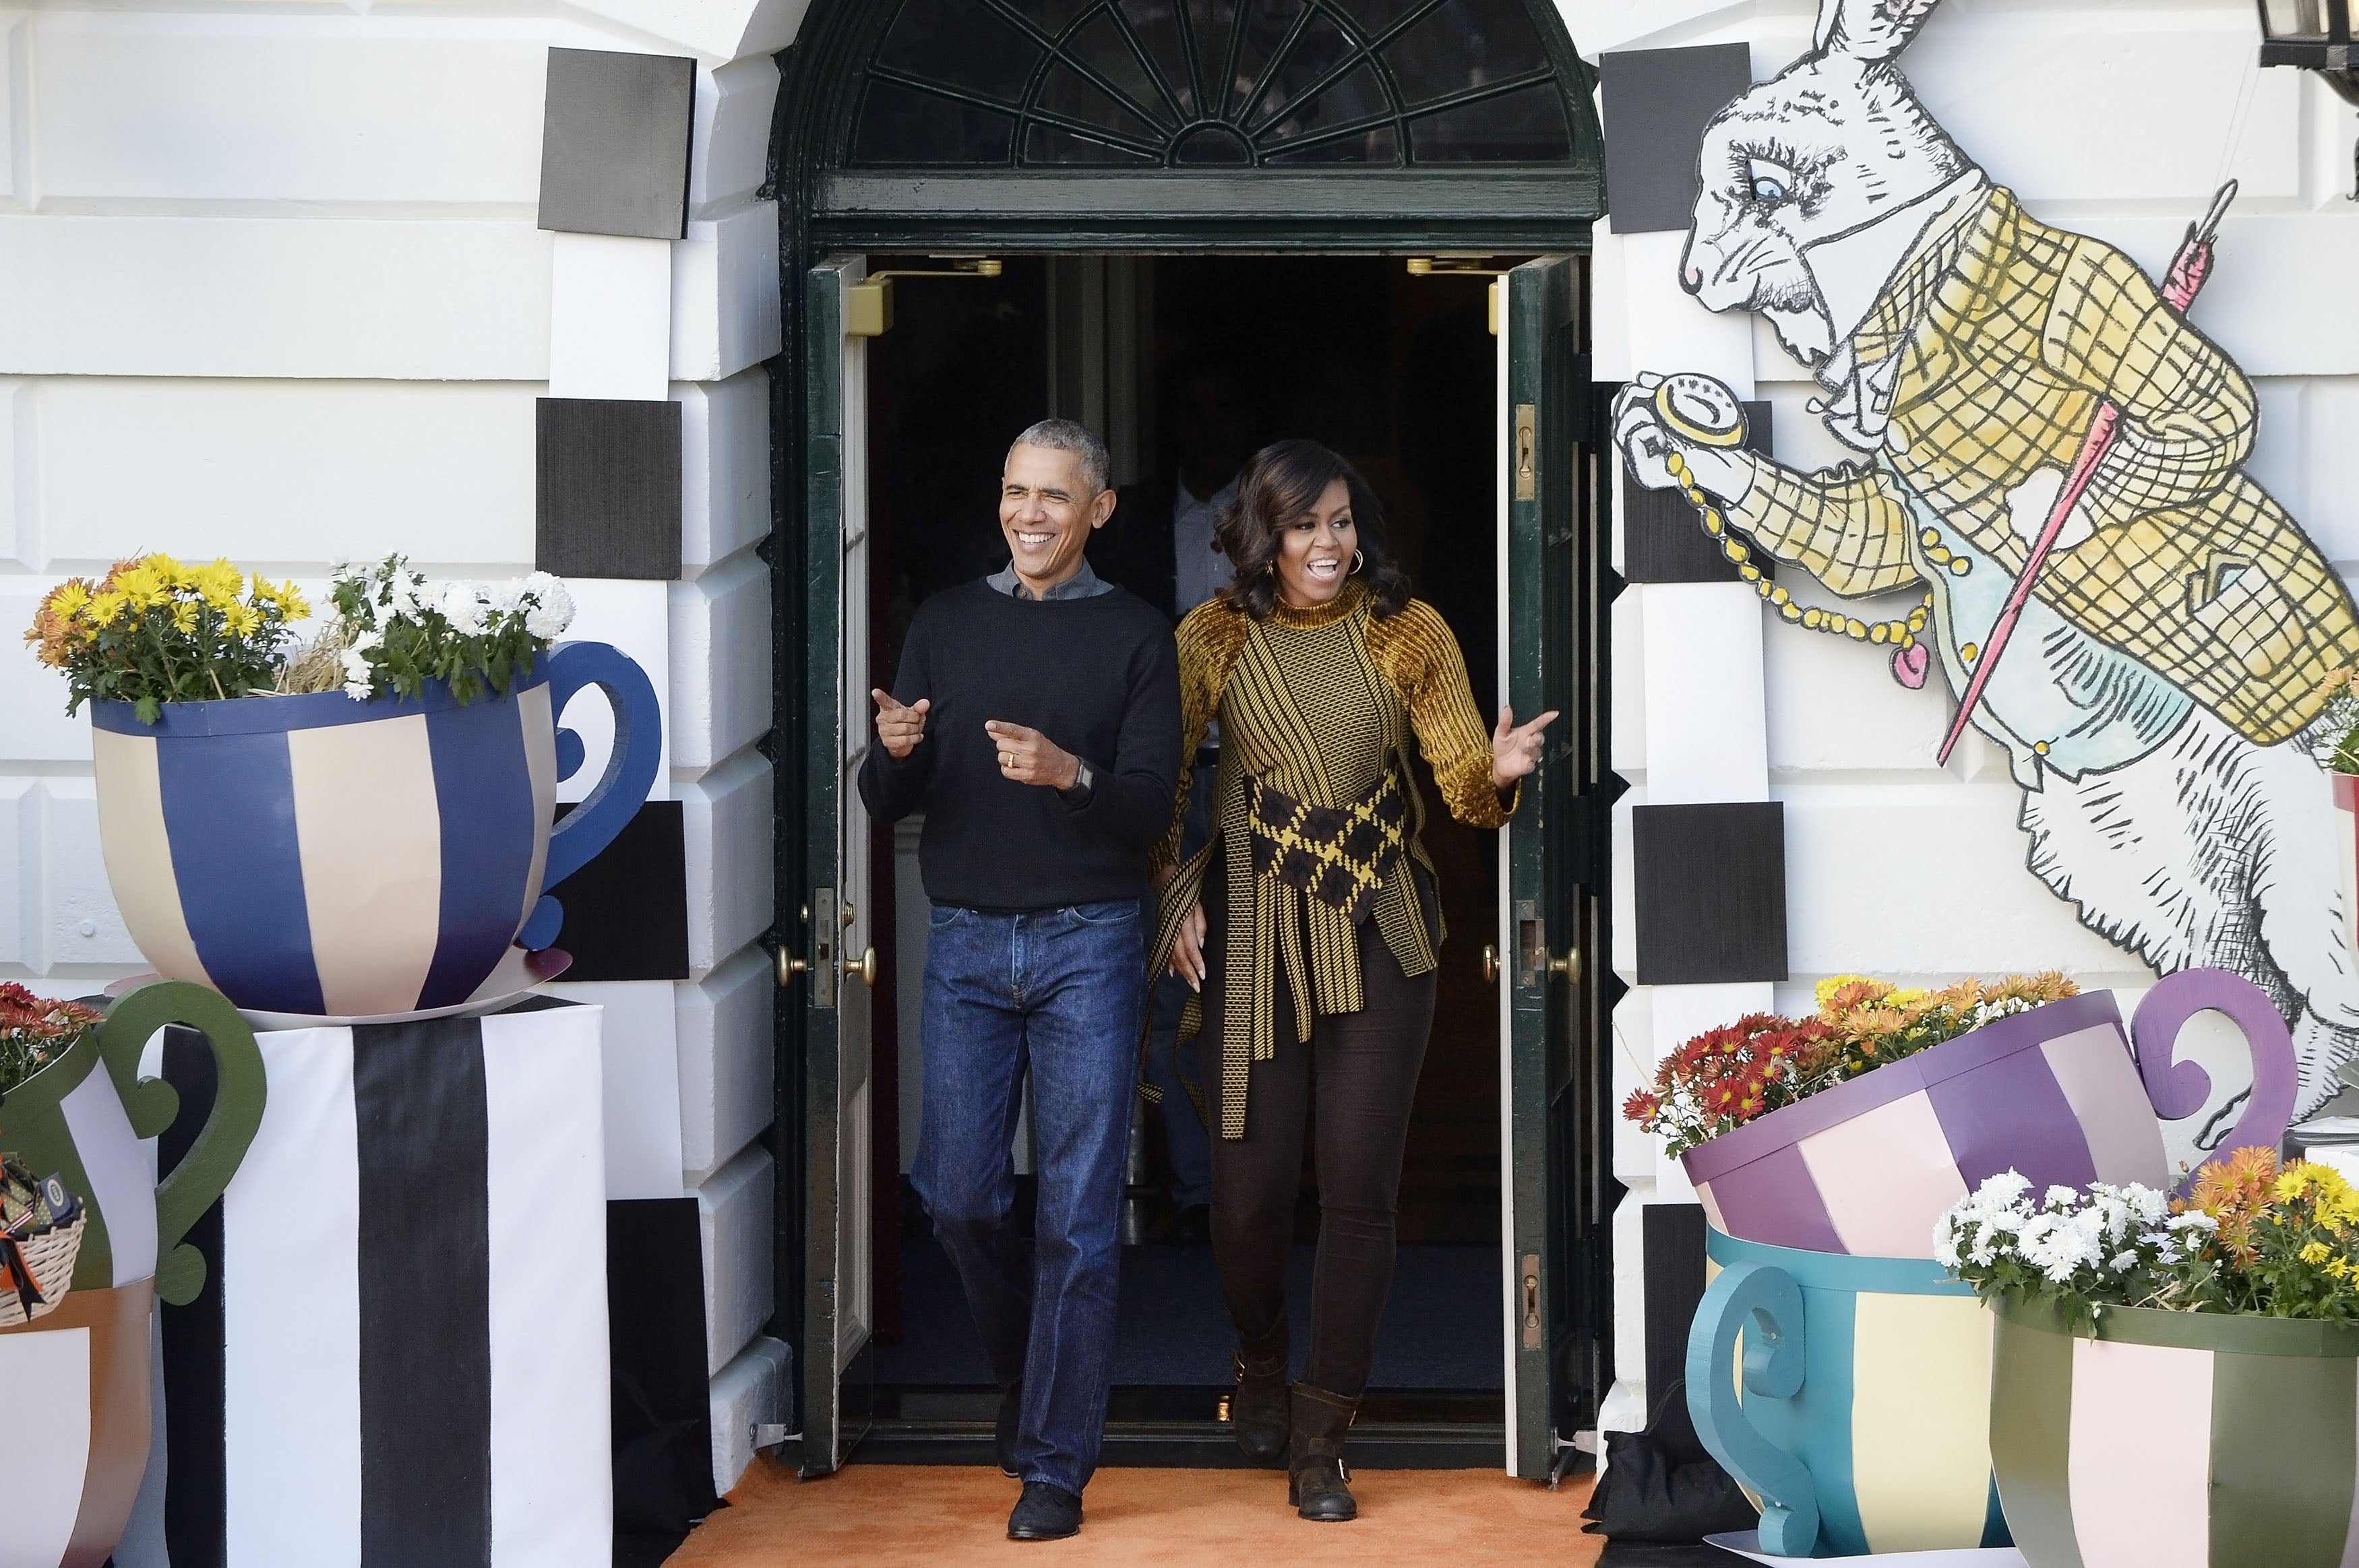 See Pics From the Obamas' Last Halloween in the White House
